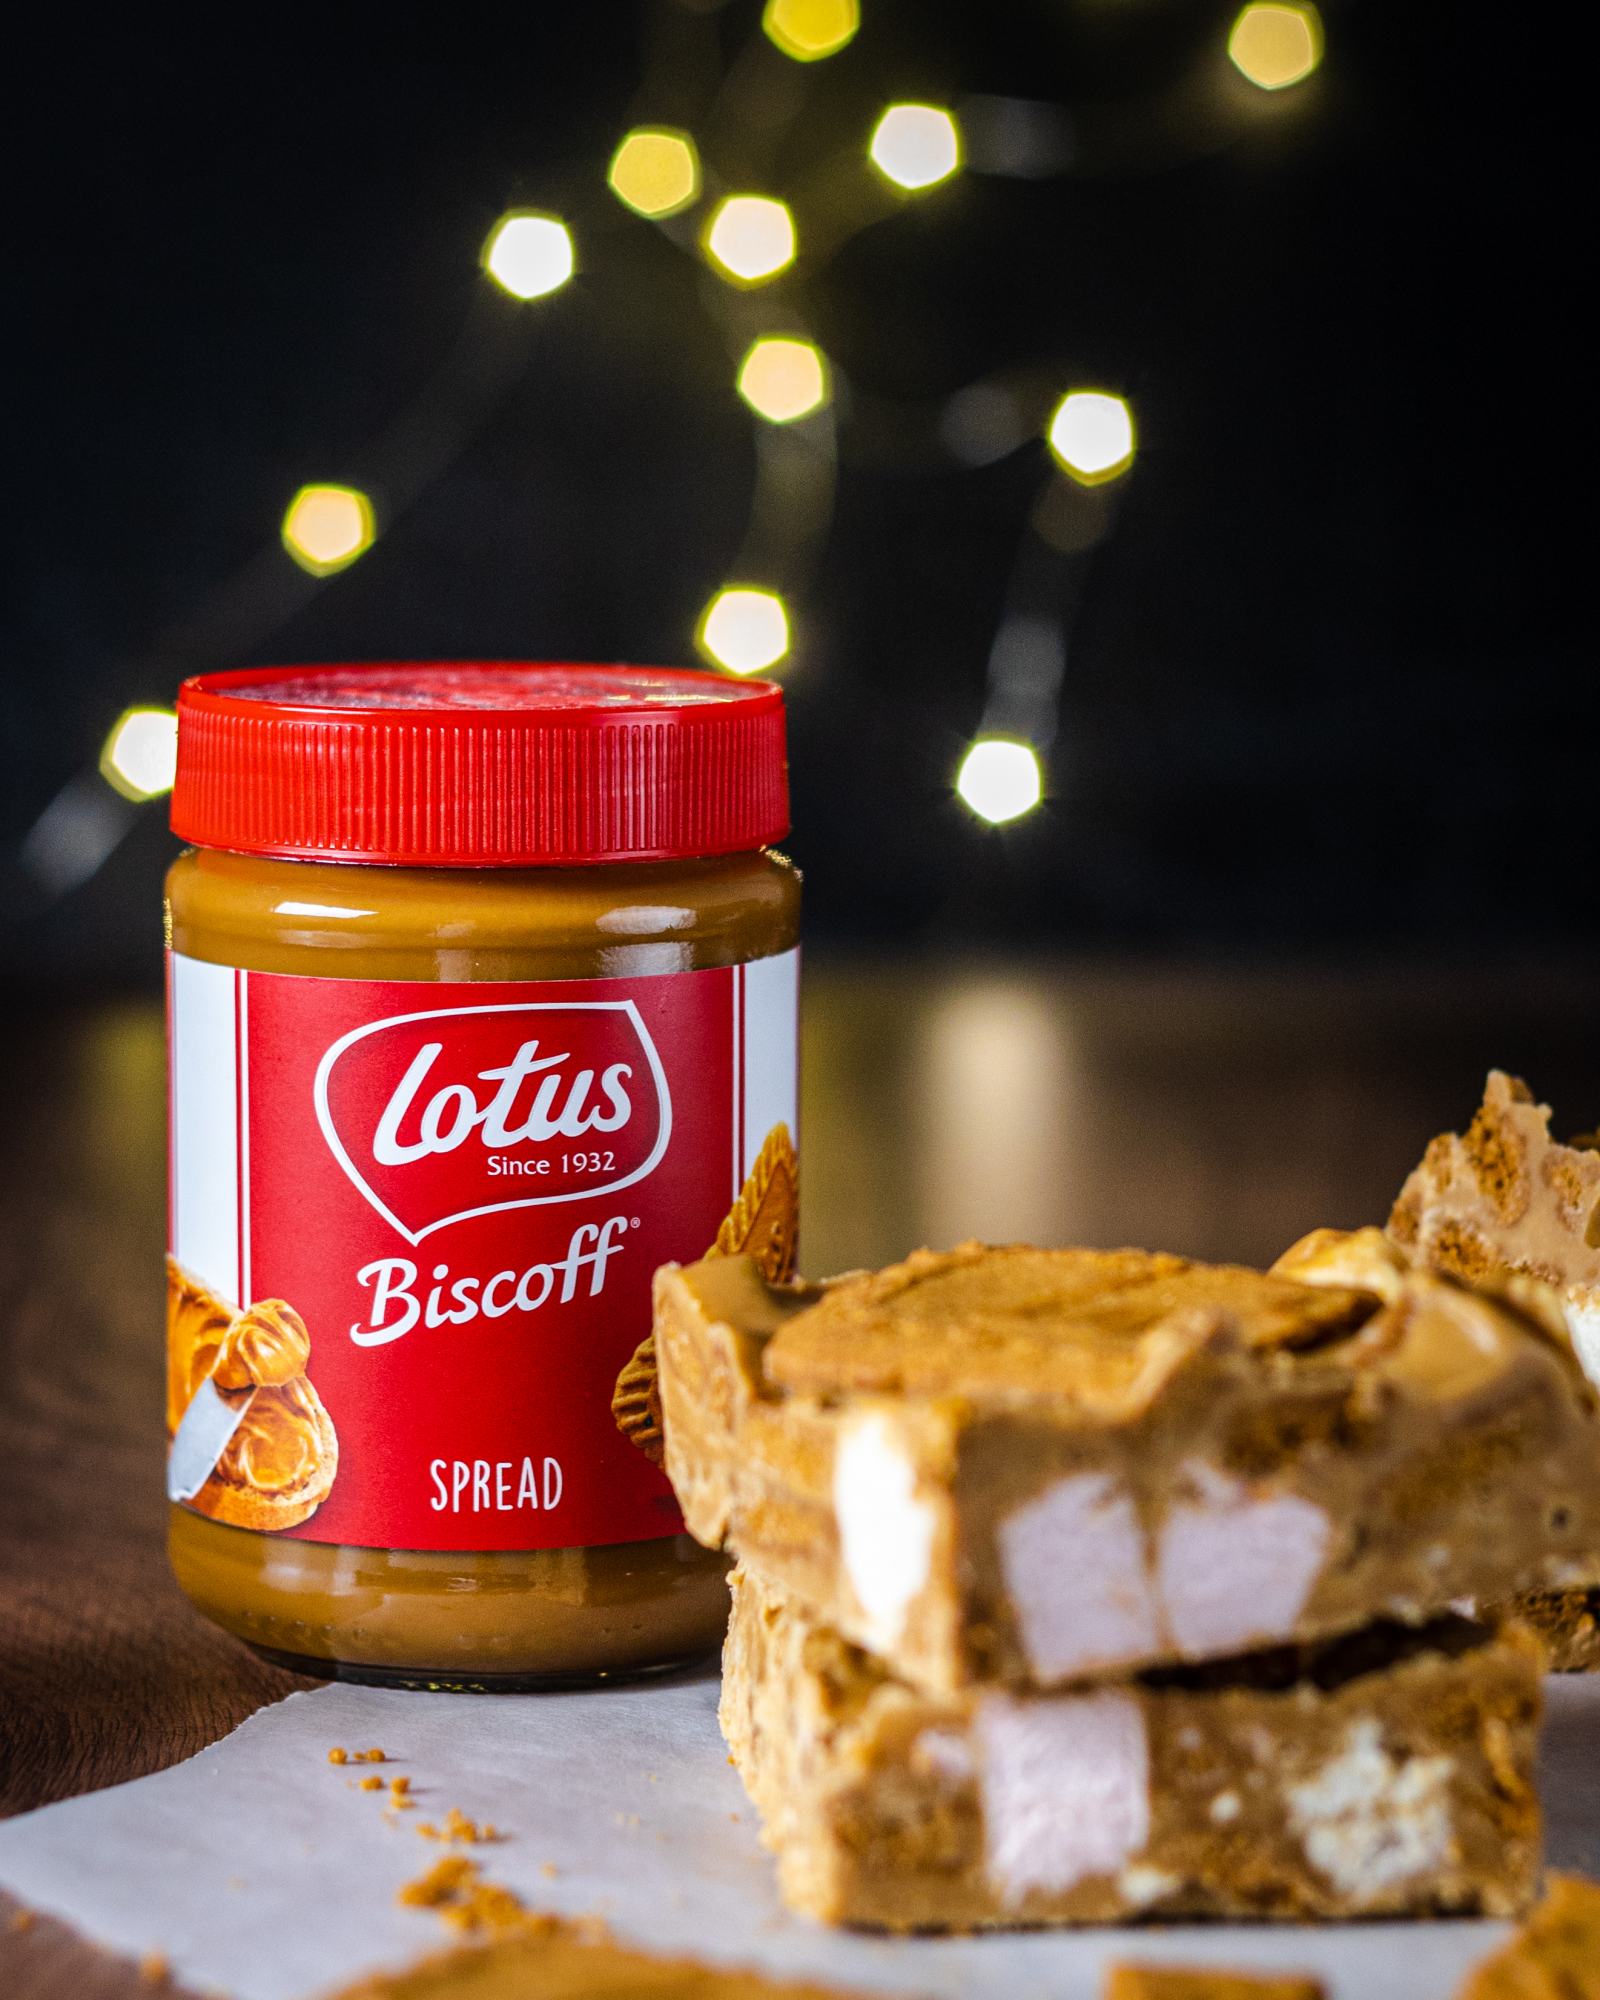 a jar of biscoff spread next to biscoff rocky road on a dark wooden table